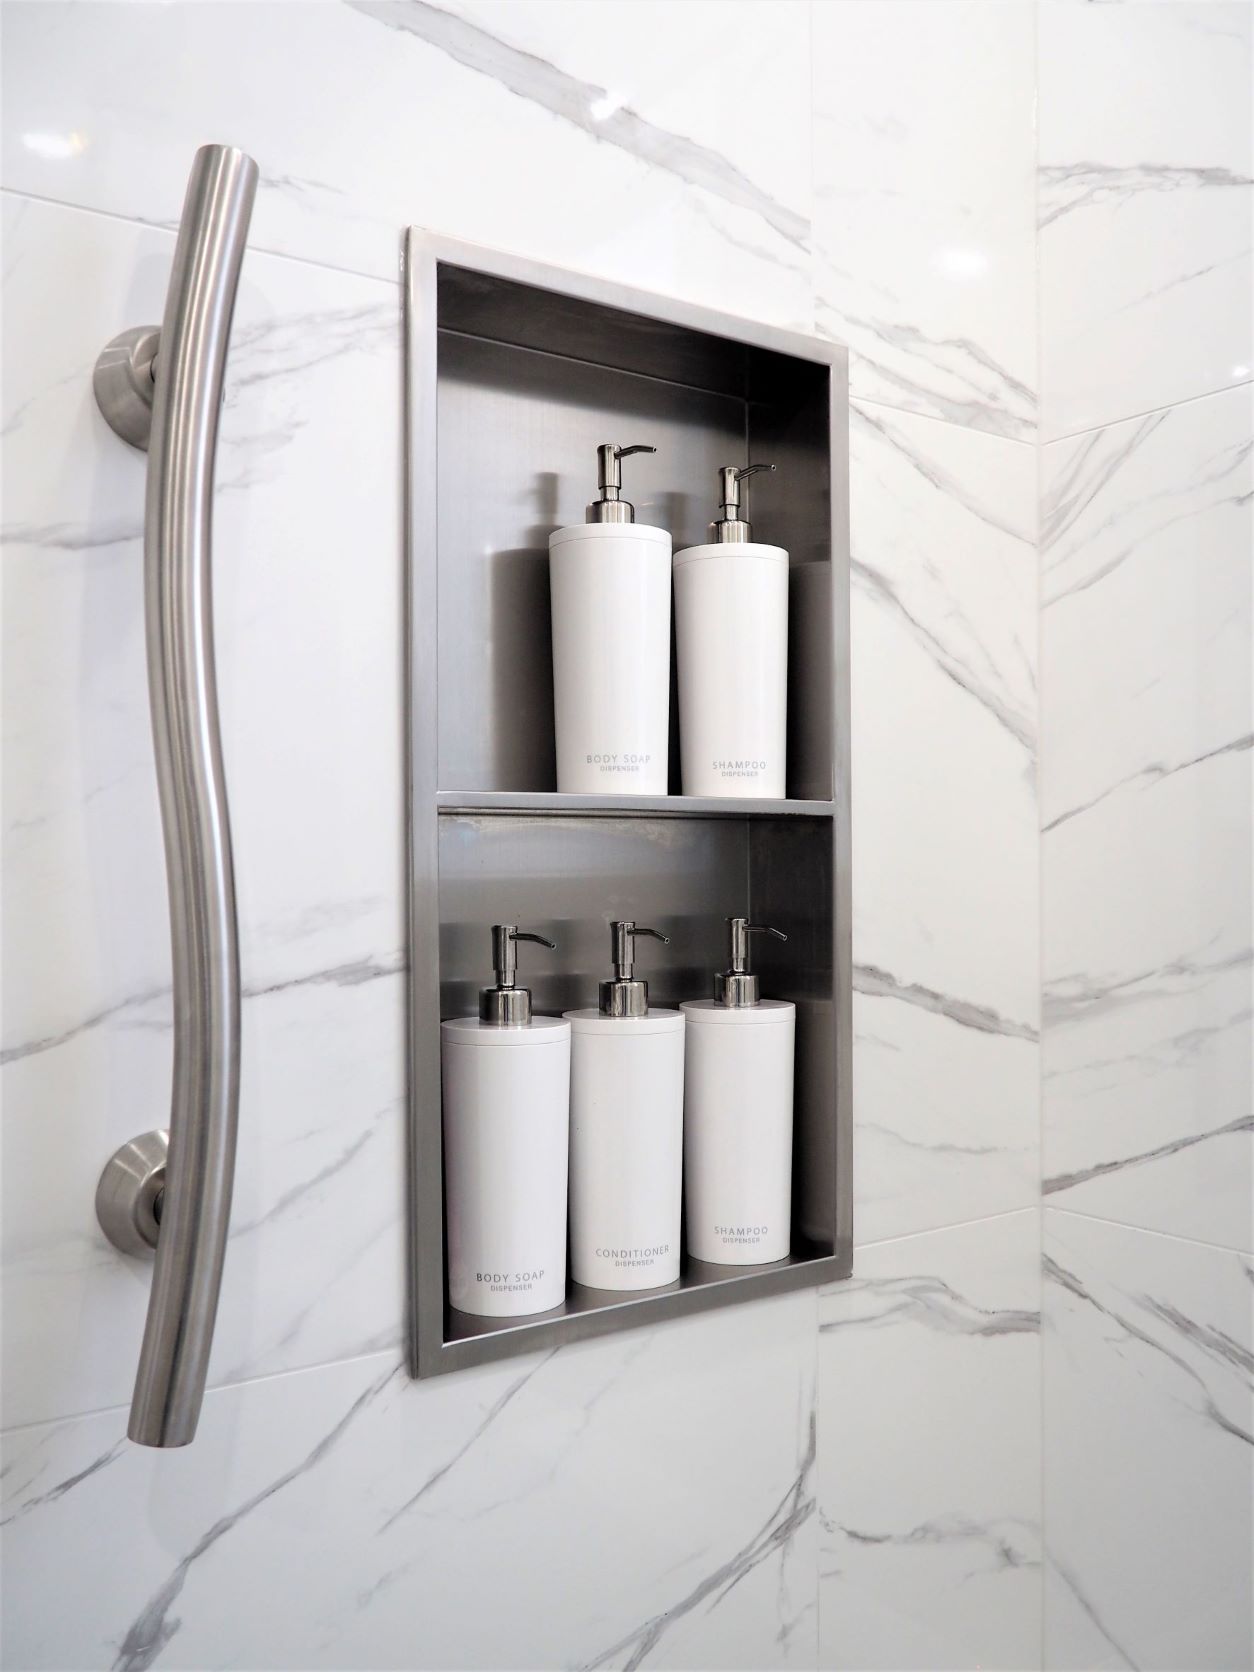 Stainless Steel Wall Niche organizes toiletries, Grab Bar provides safety